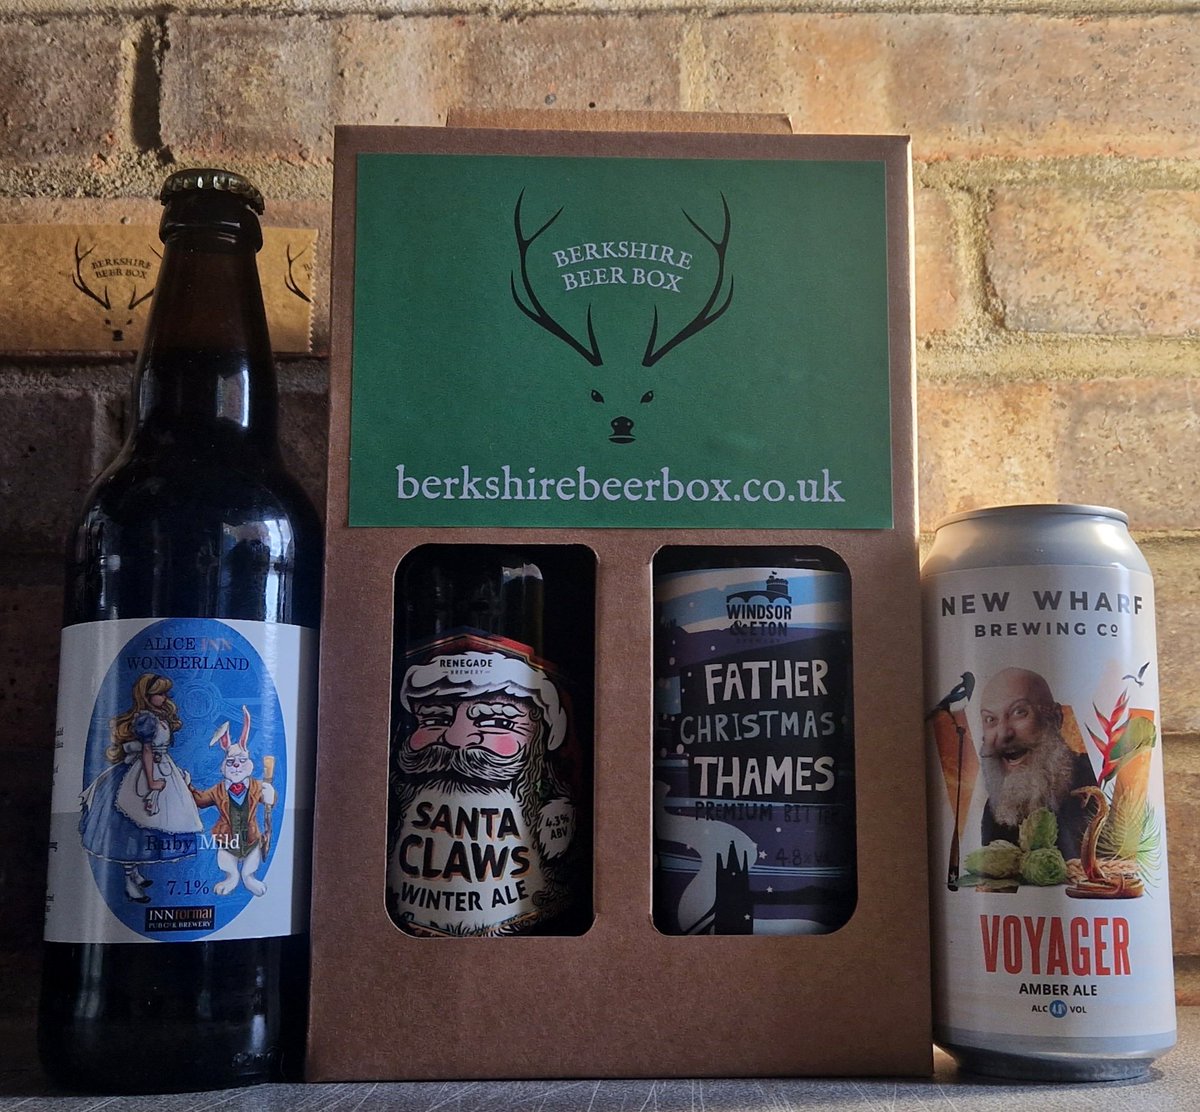 THE ULTIMATE CHRISTMAS BOX In shop now! Great for gifting! berkshirebeerbox.co.uk/shop #Berkshire #Beer #Christmas